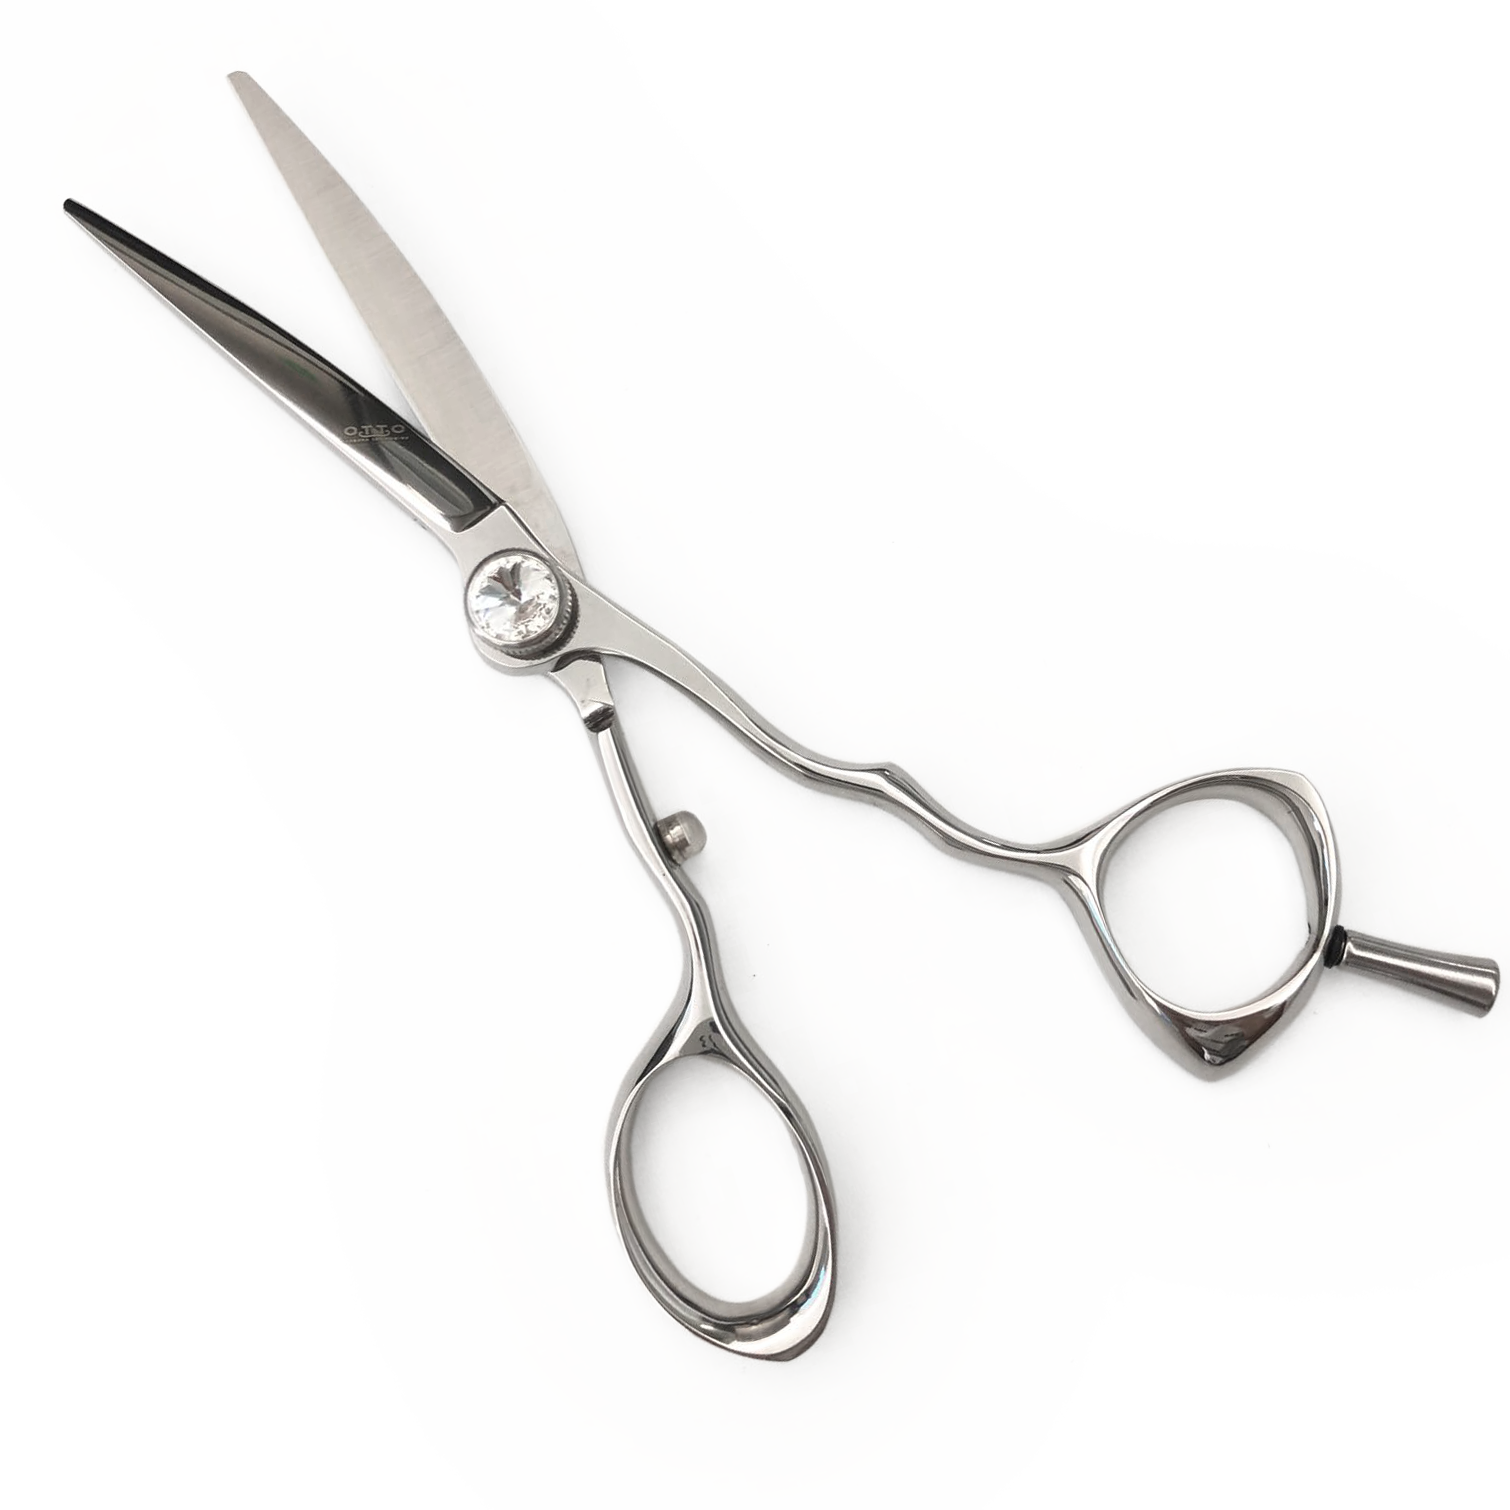 Otto Diamond Hair Cutting Shears (6”) - ProCare Outlet by Otto